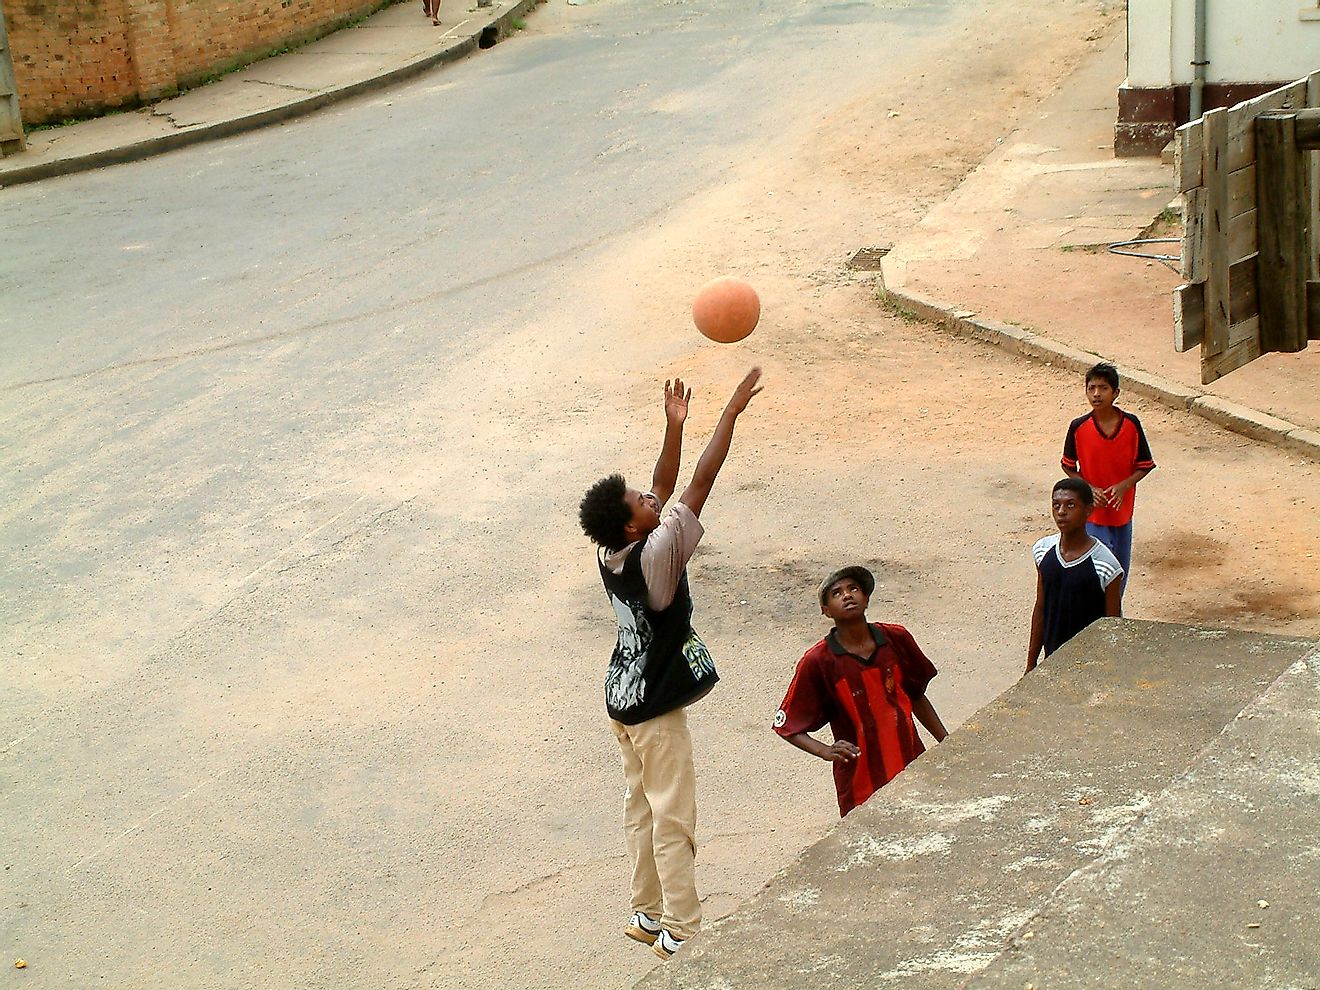 Boys practicing basketball in the street in Madagascar. Image credit: Muriel Lasure/Shutterstock.com